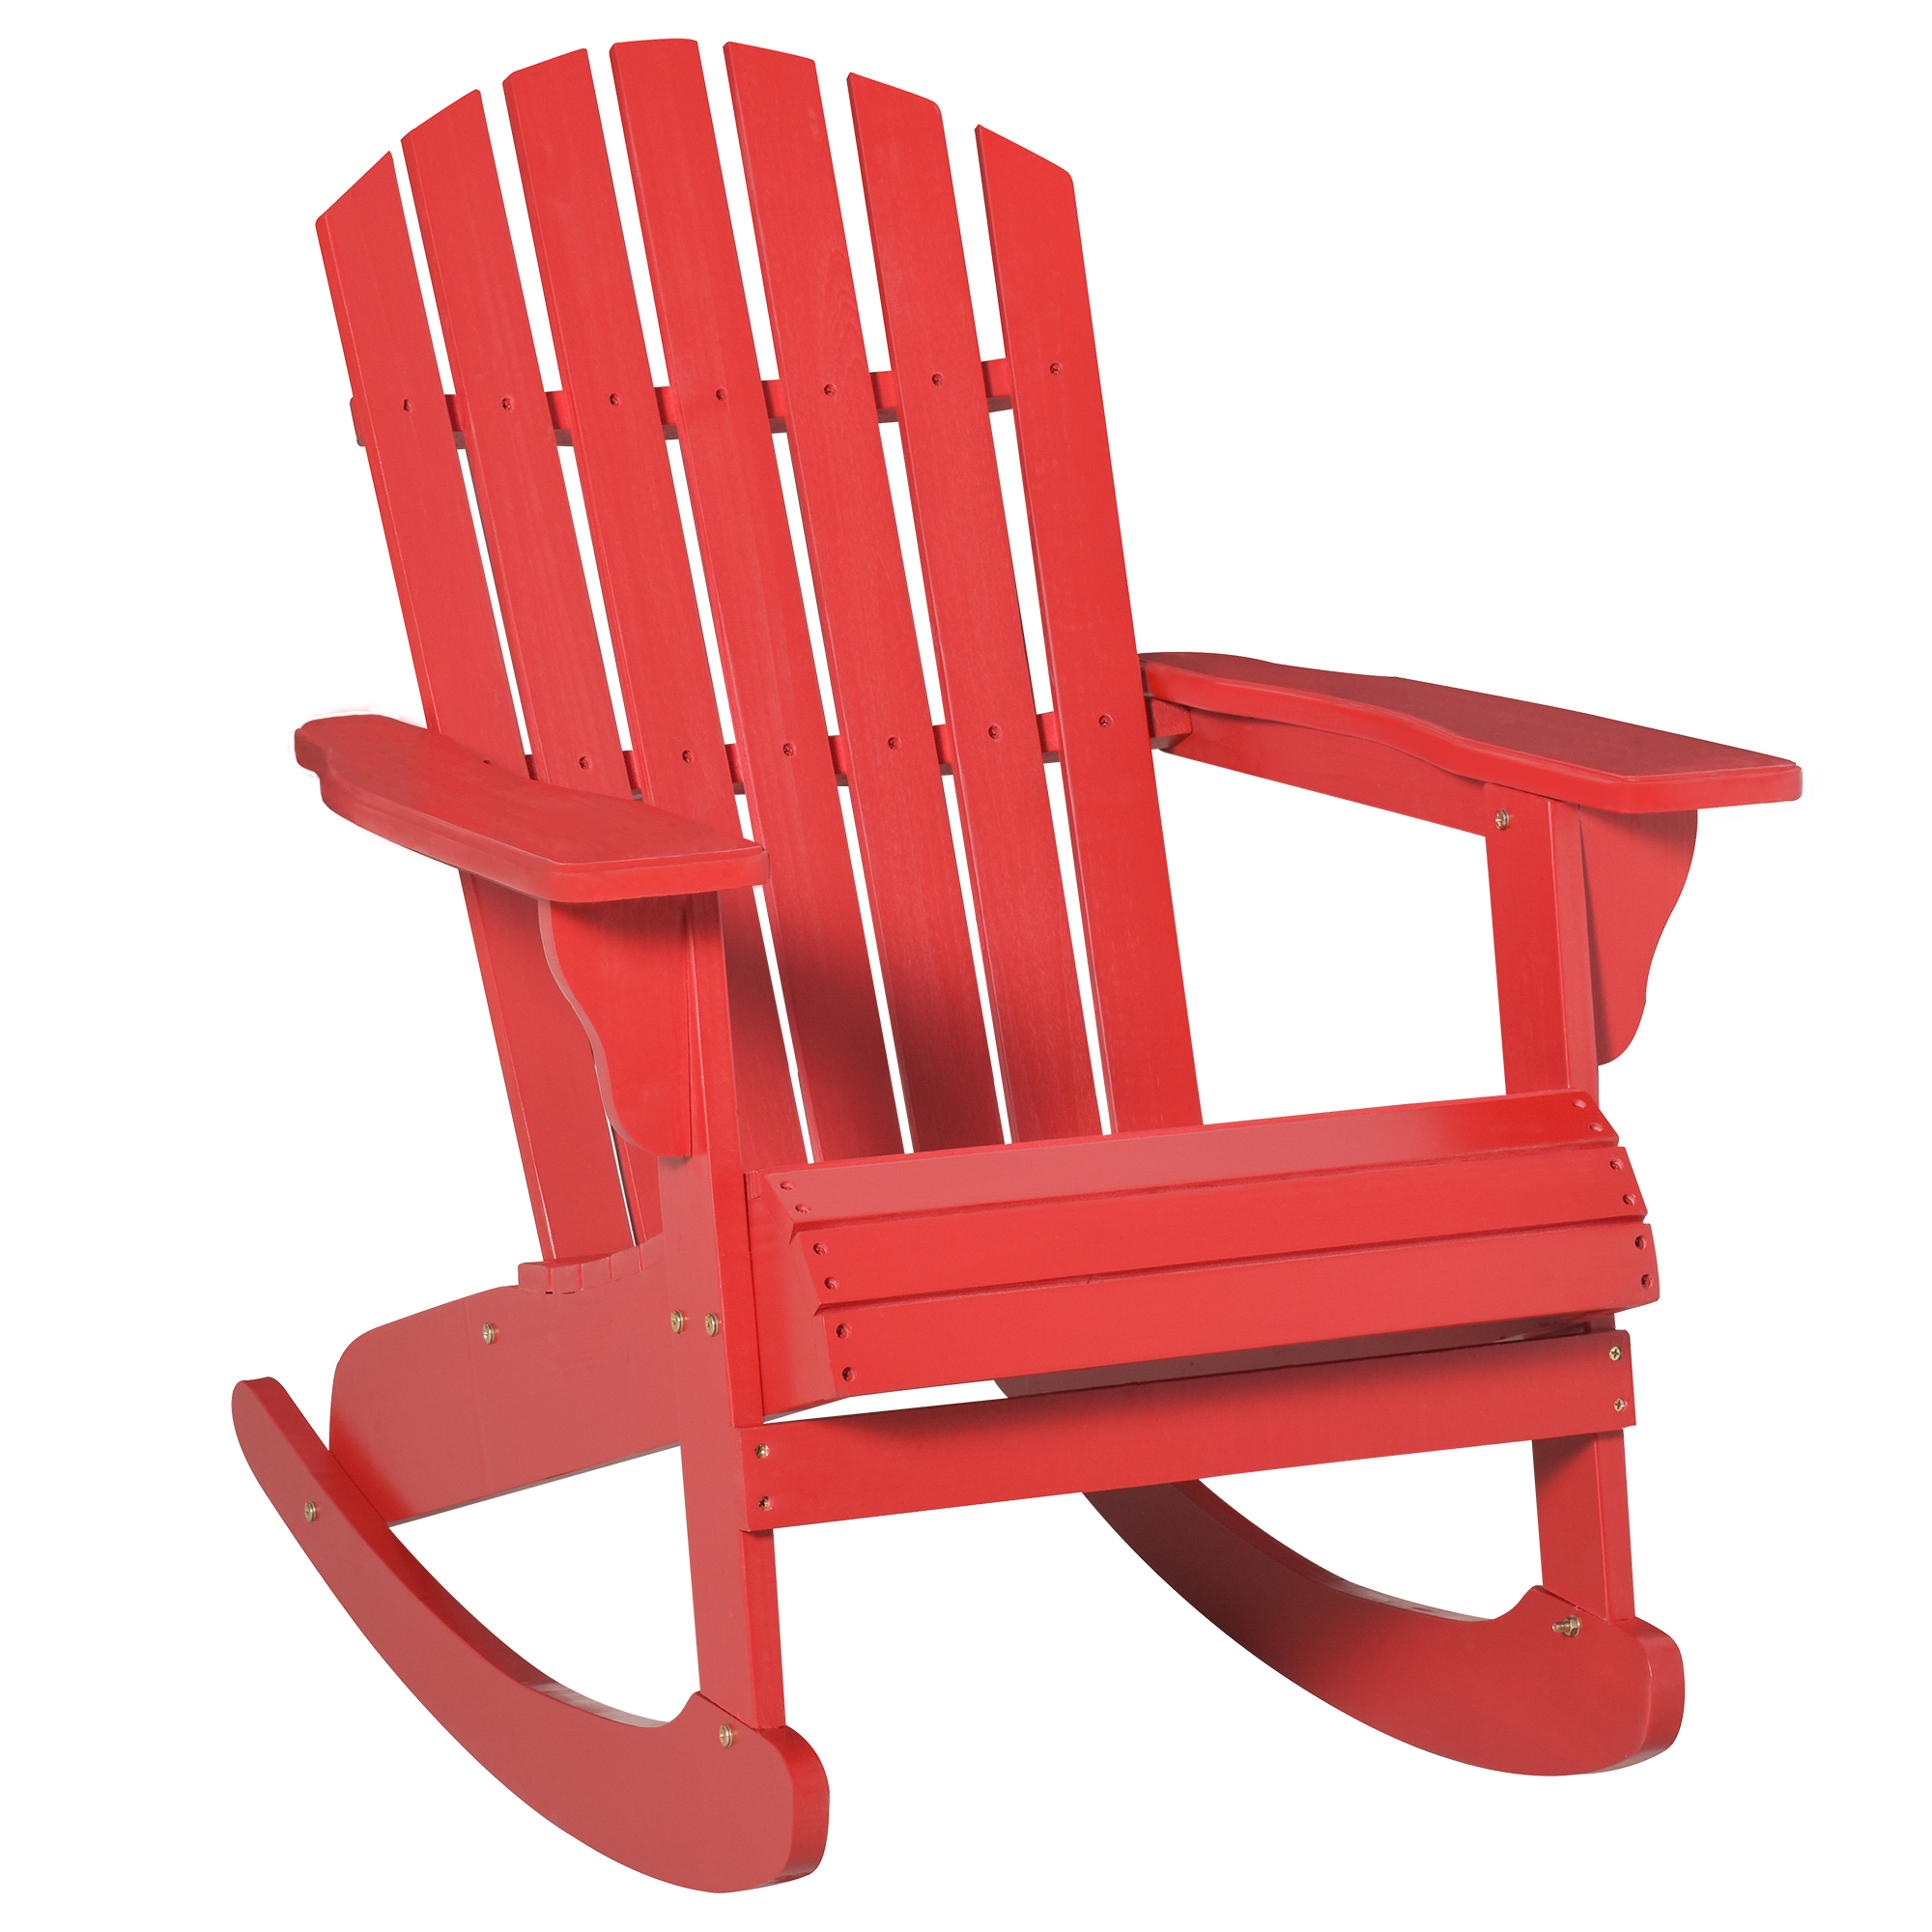 Outsunny Wooden Adirondack Rocking Chair with Slatted Wooden Design - image 1 of 9